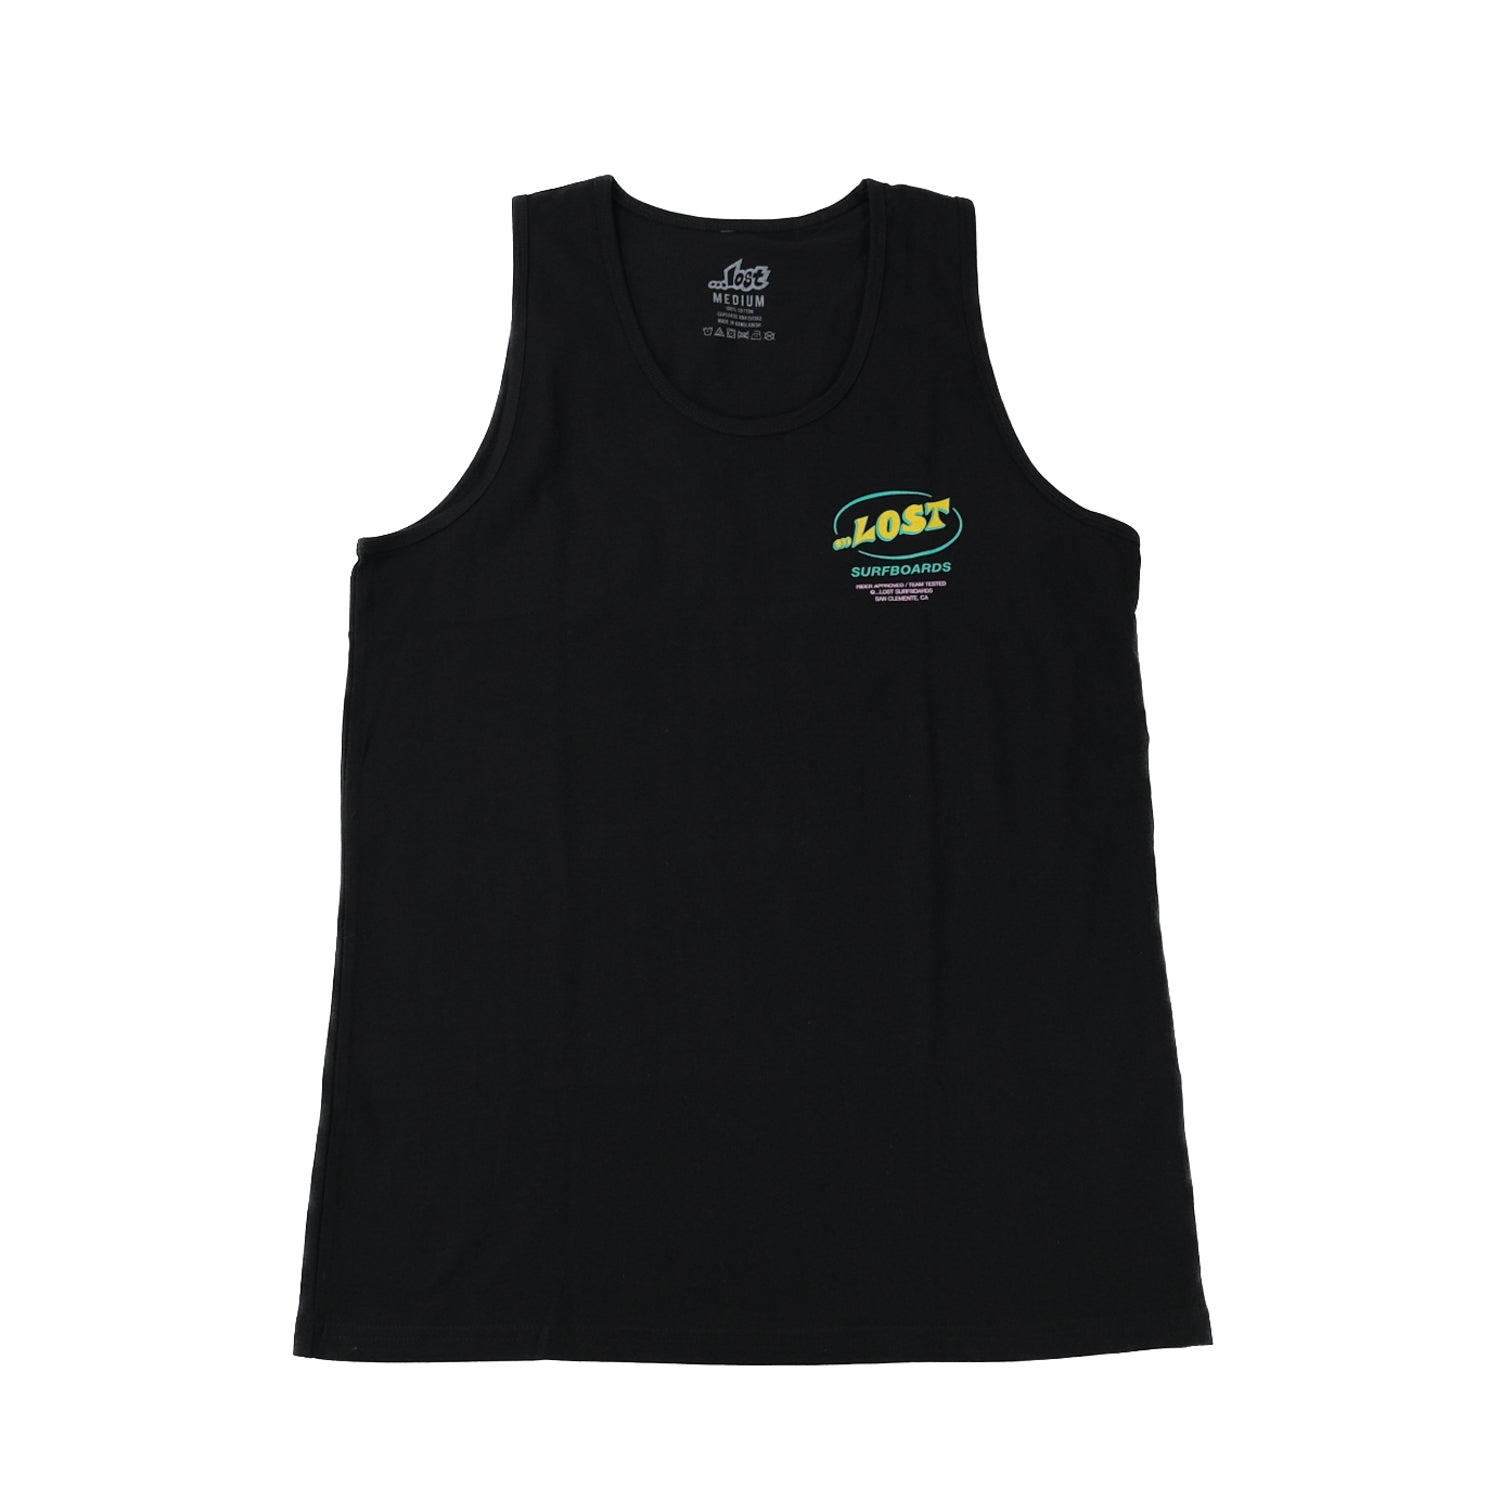 Approved Tank - Black